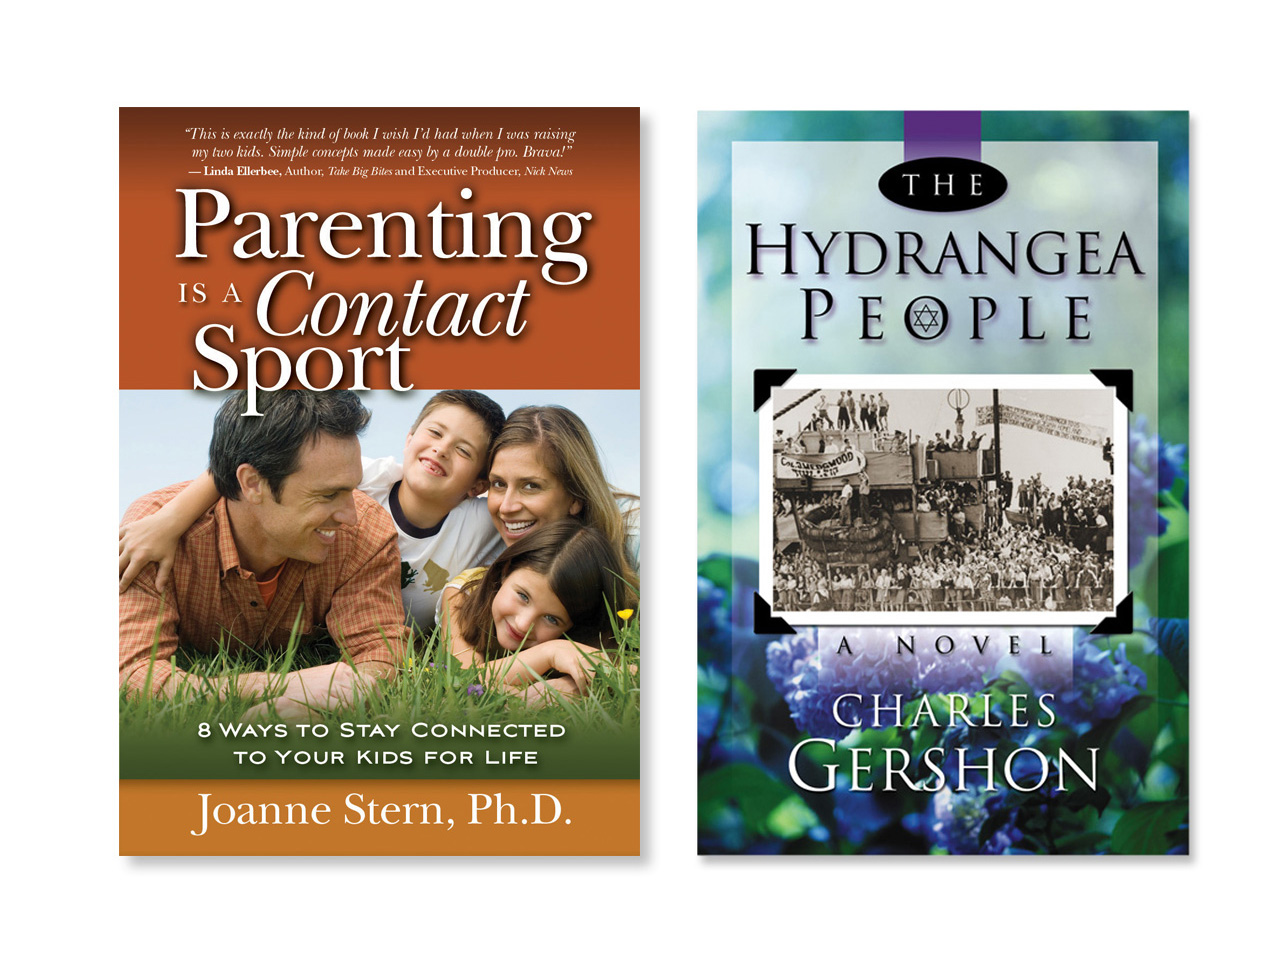 Parenting is a Contact Sport by Joanne Stern